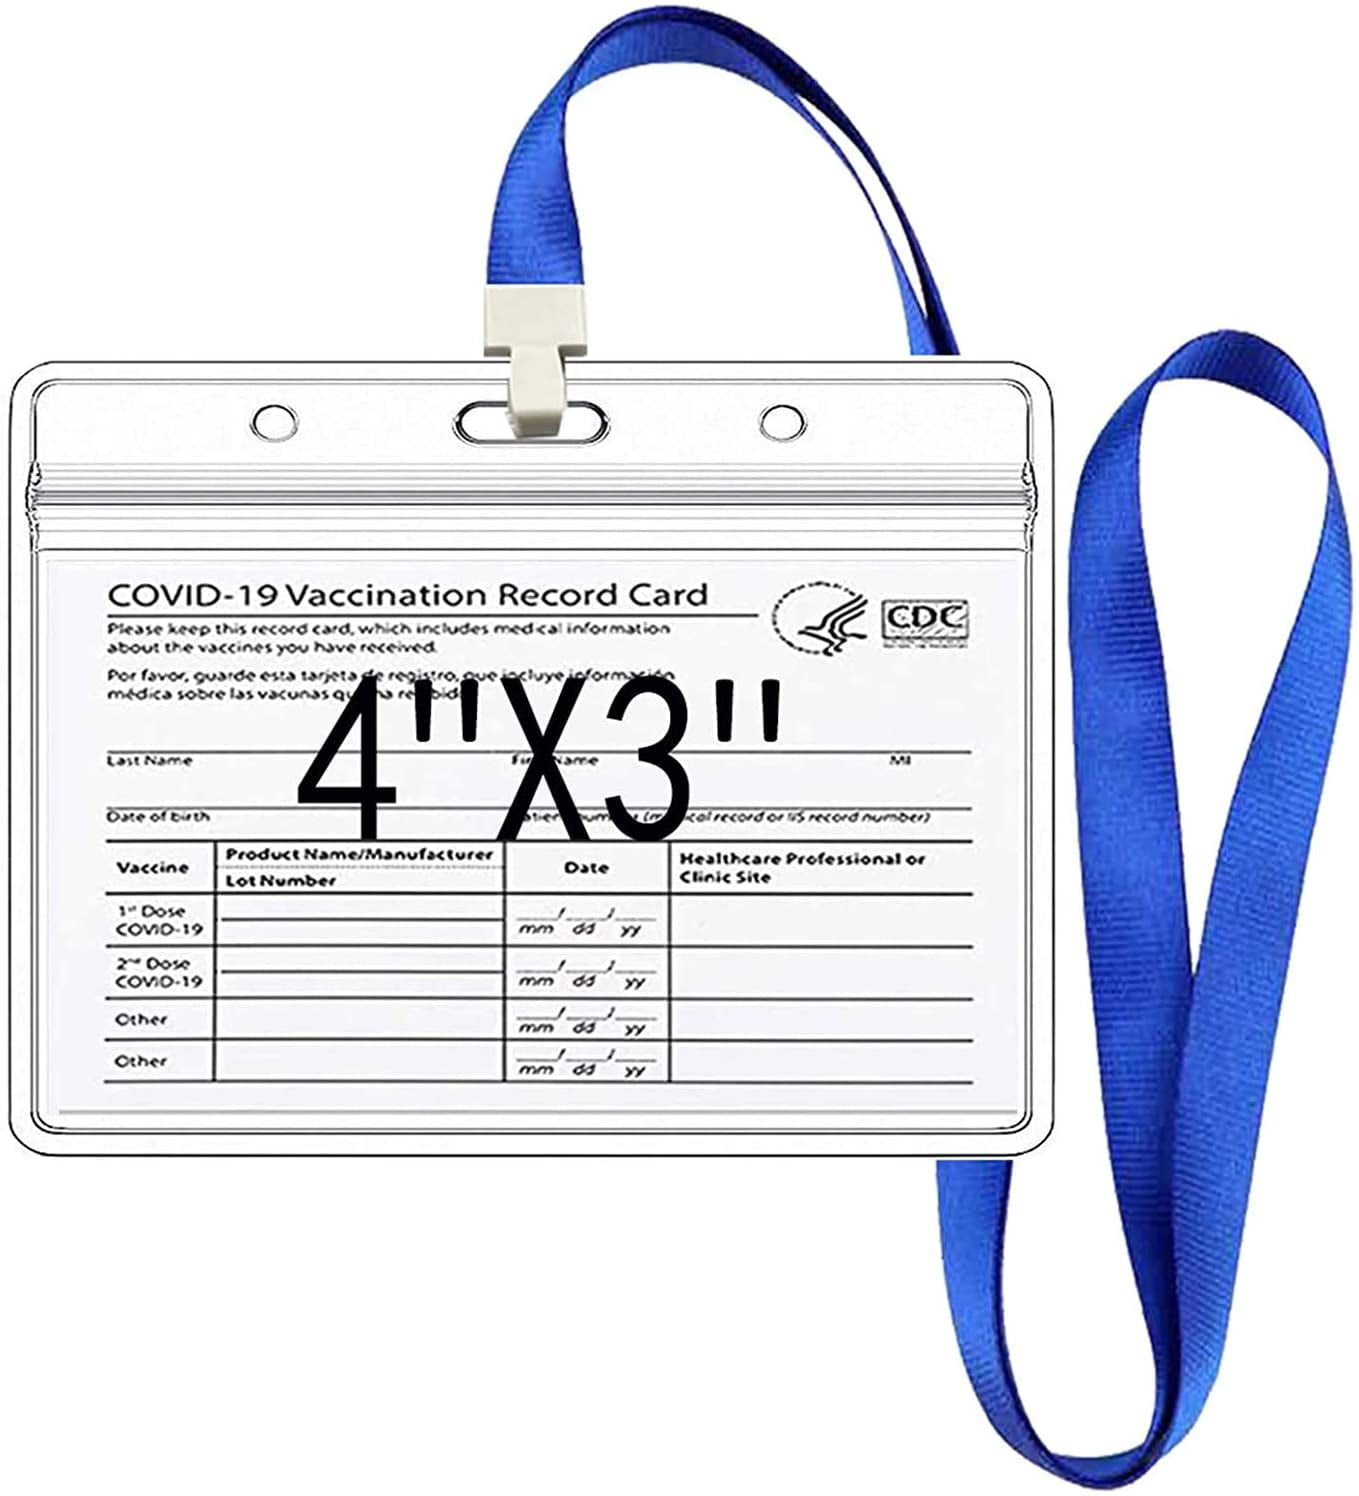 5 Pcs Clear Waterproof Plastic Badge Holders Horizontal PVC Badge Card Holders with Resealable Zip 4 X 3 Inches Name Tag ID Card Holders with Blue Lanyards